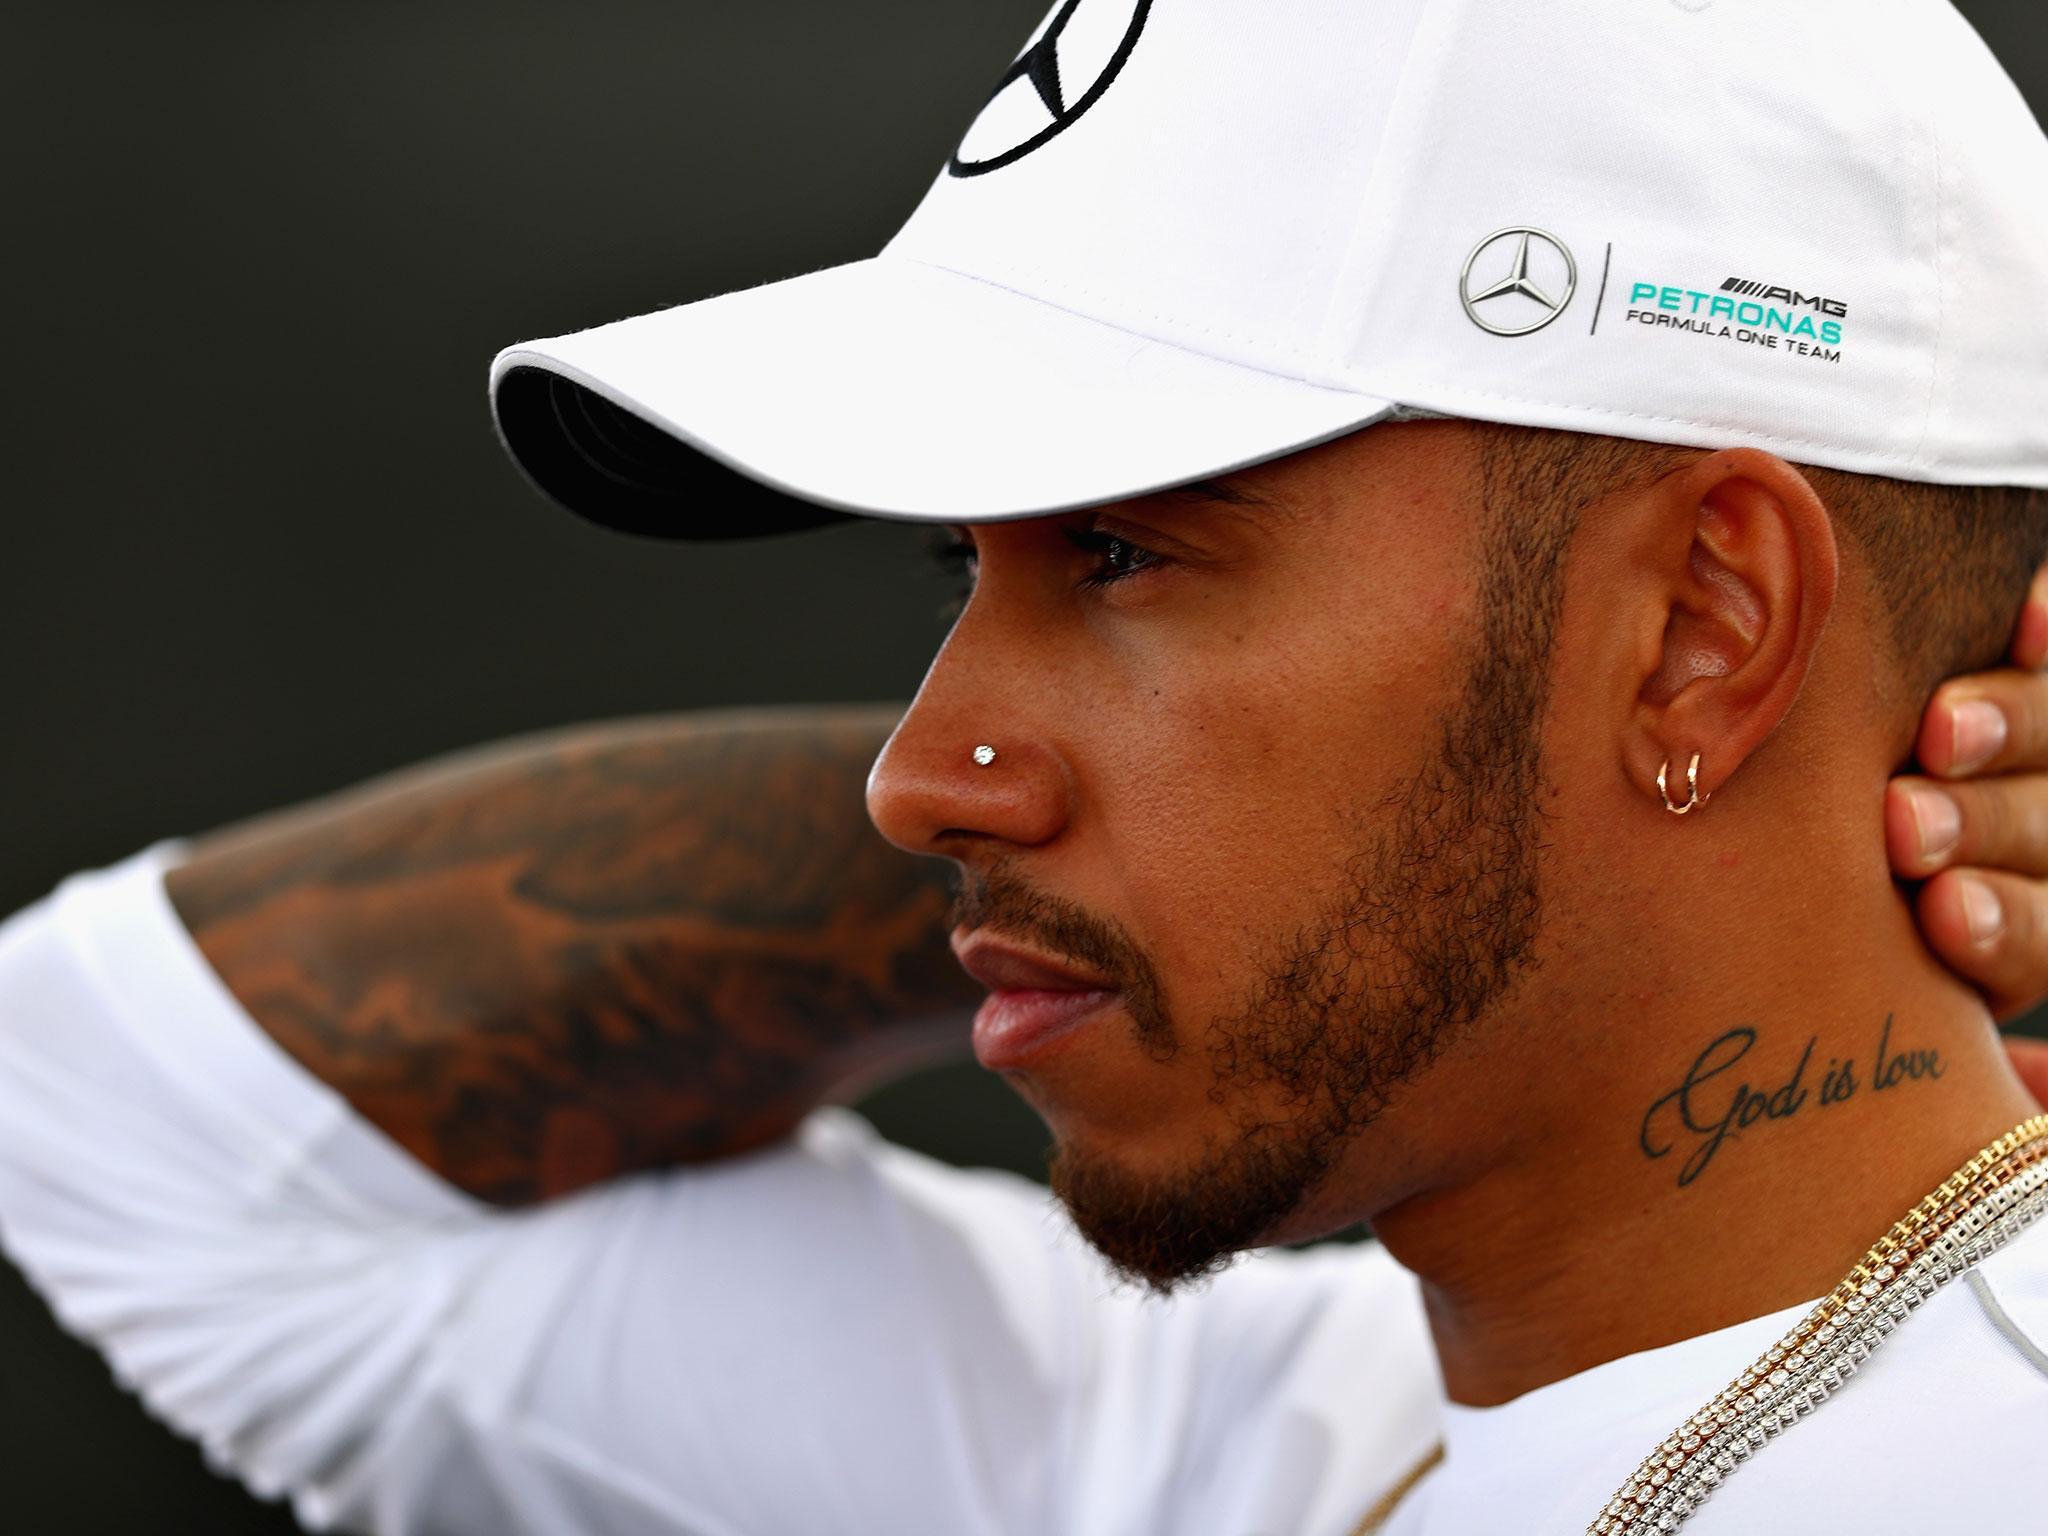 Lewis Hamilton won't protest at the US Grand Prix this weekend